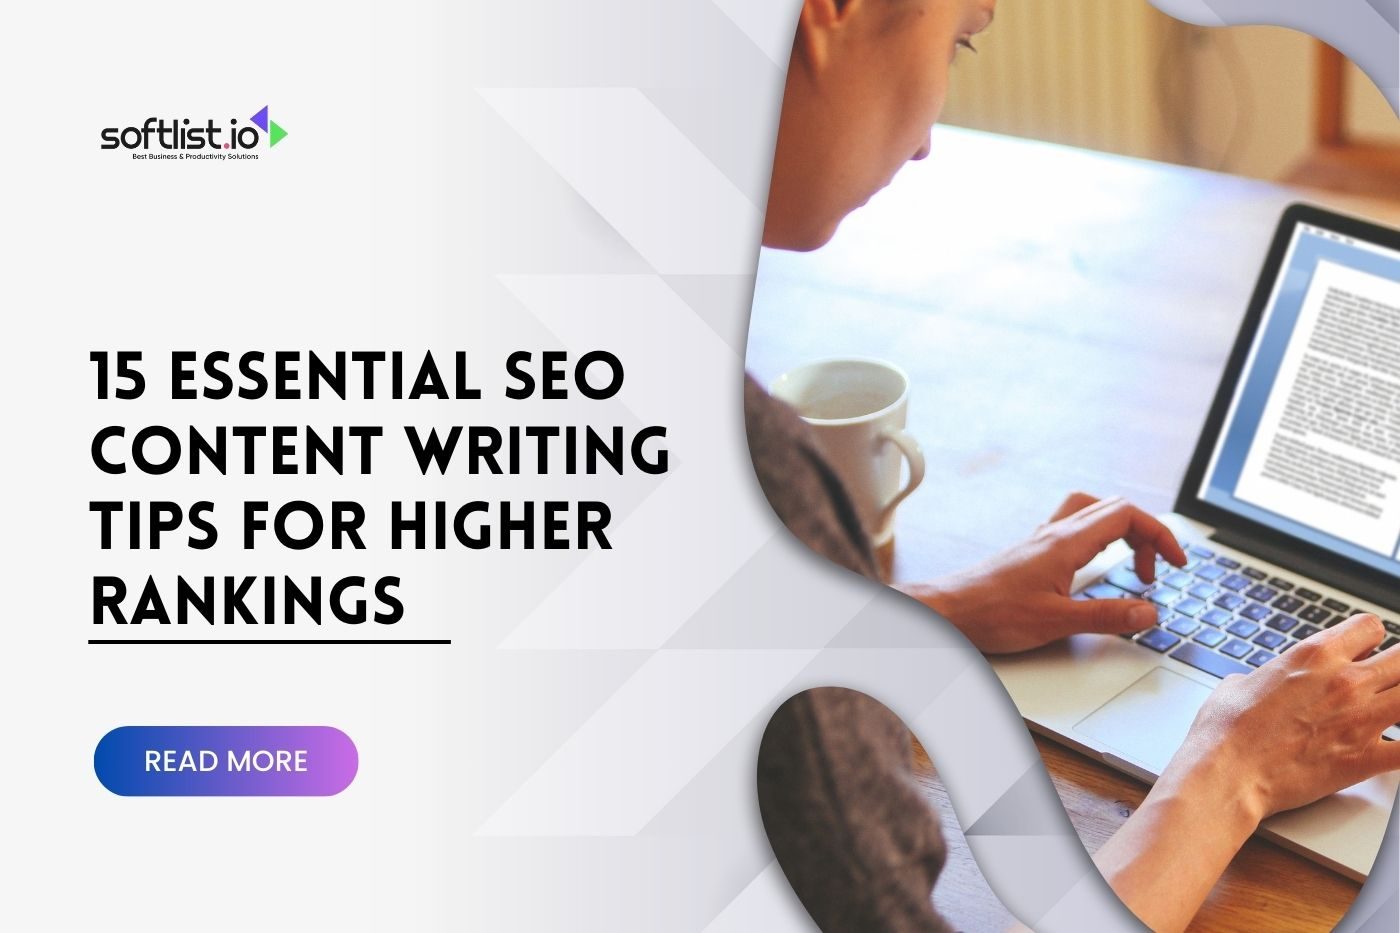 15 Essential SEO Content Writing Tips for Higher Rankings